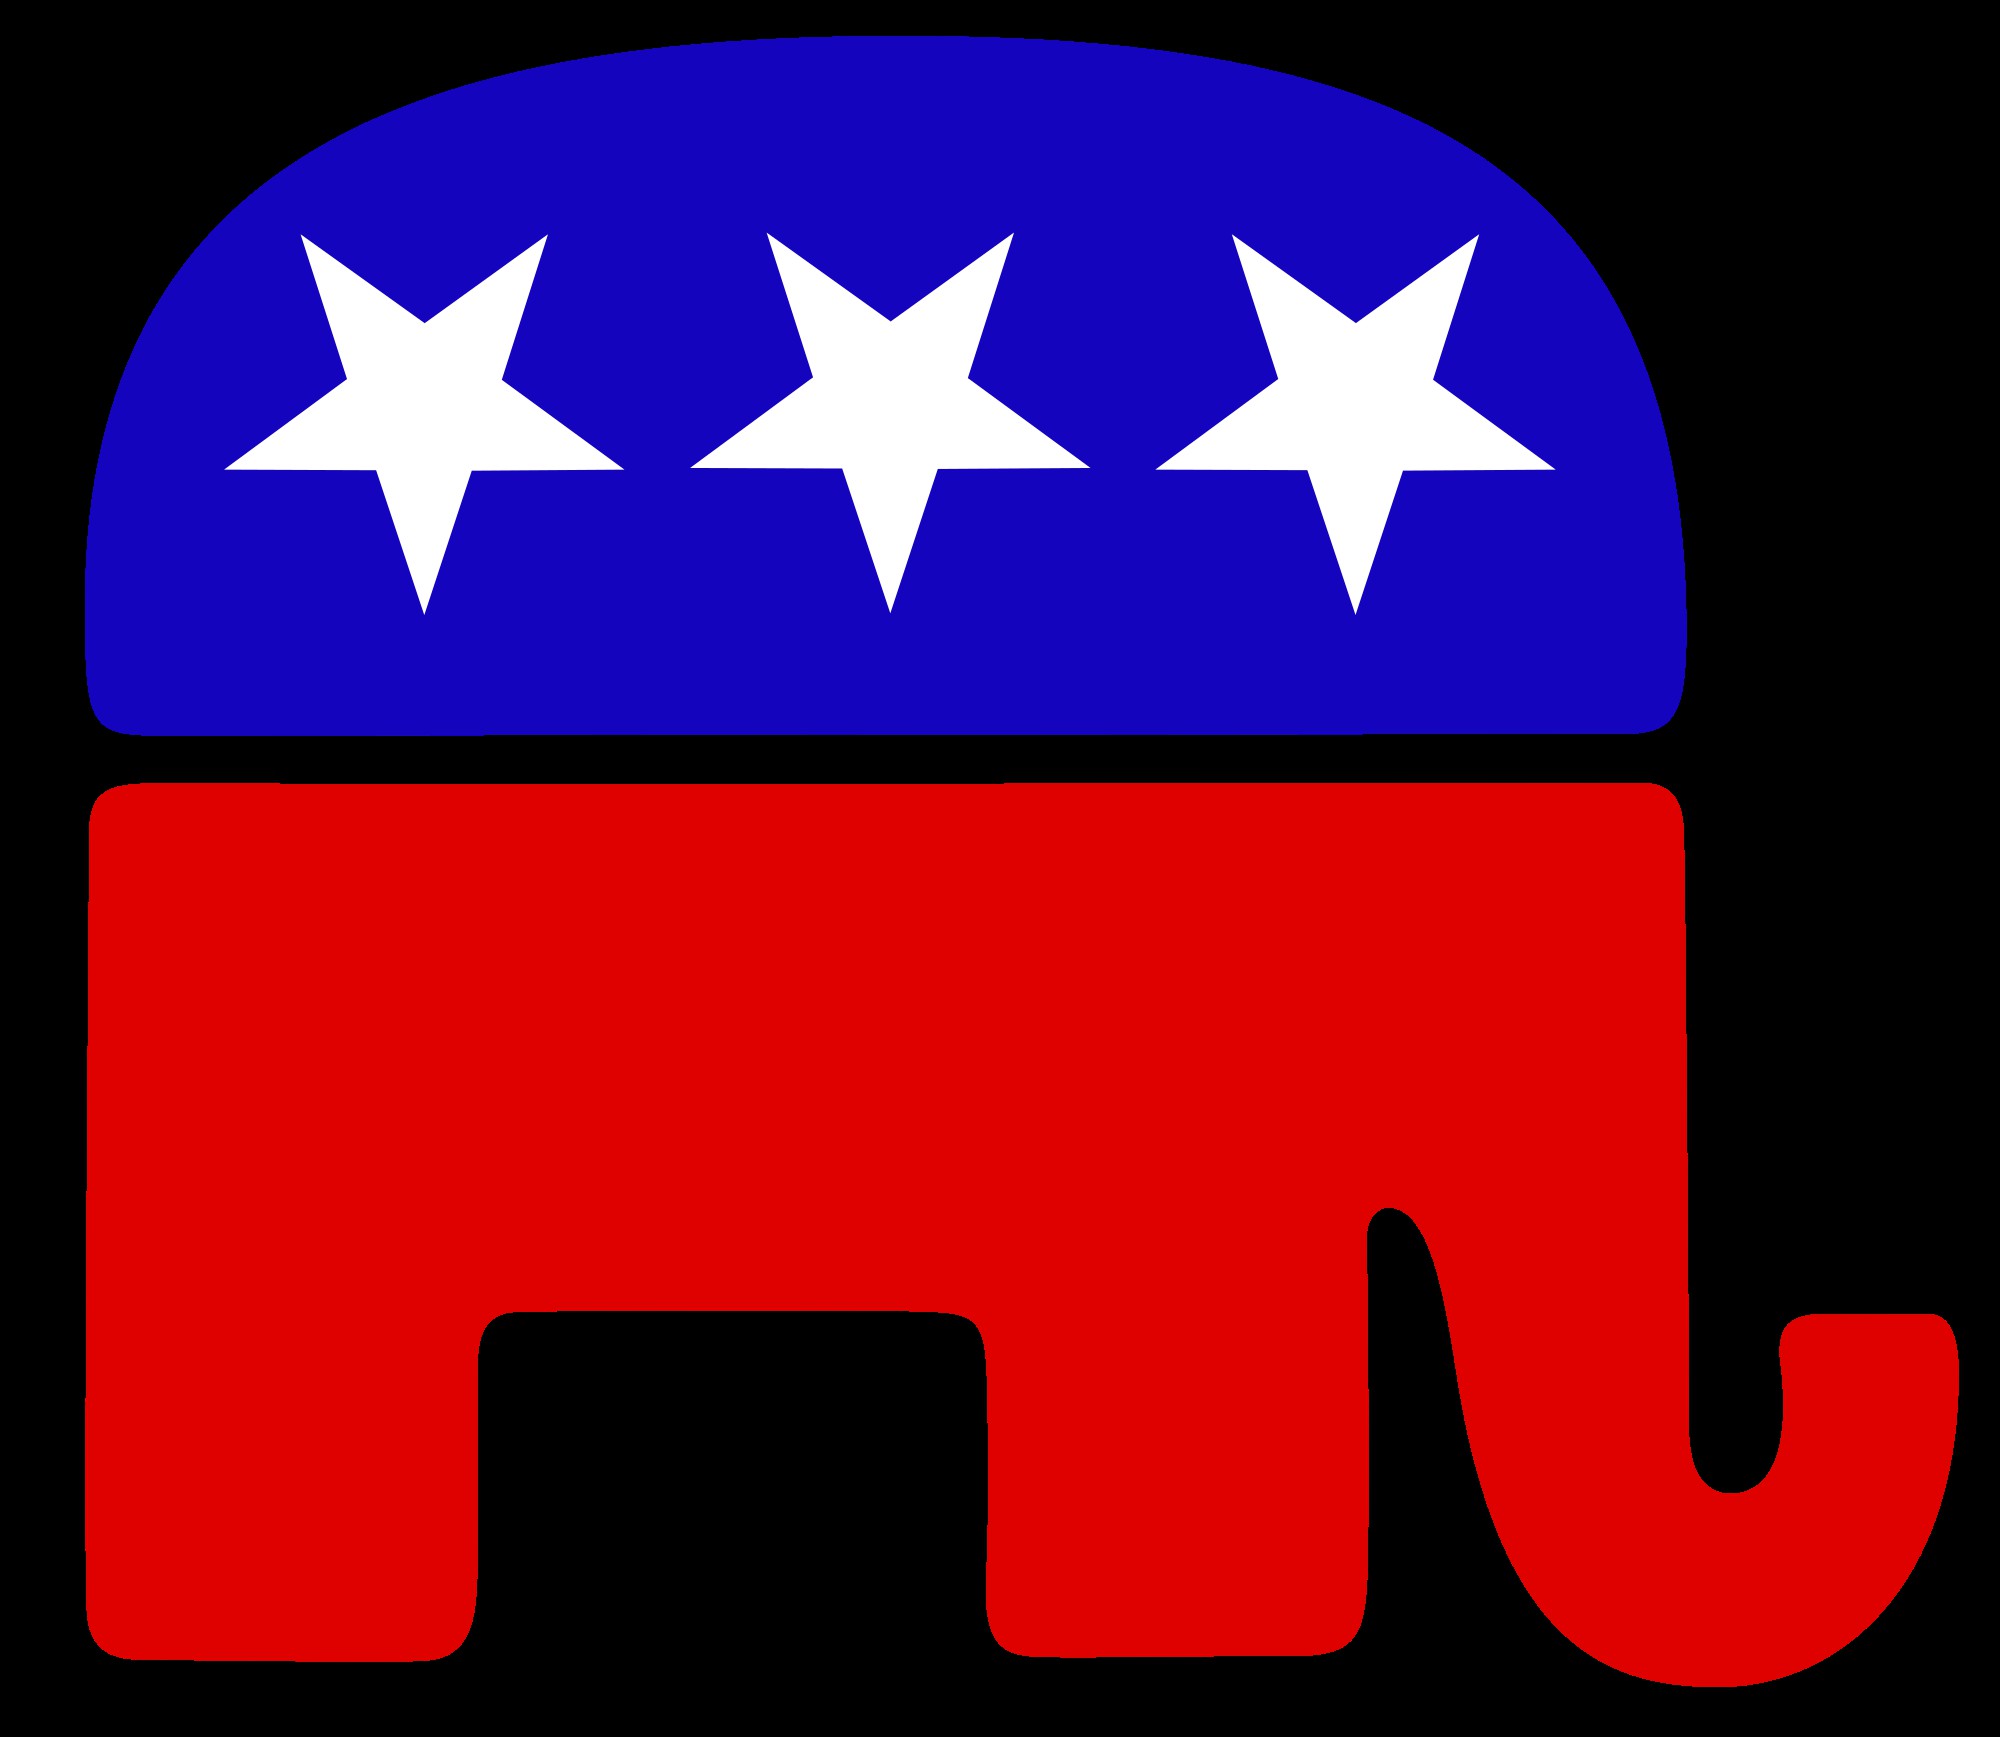 The Republican Party or GOP Grand Old Party is represented by an Elephant